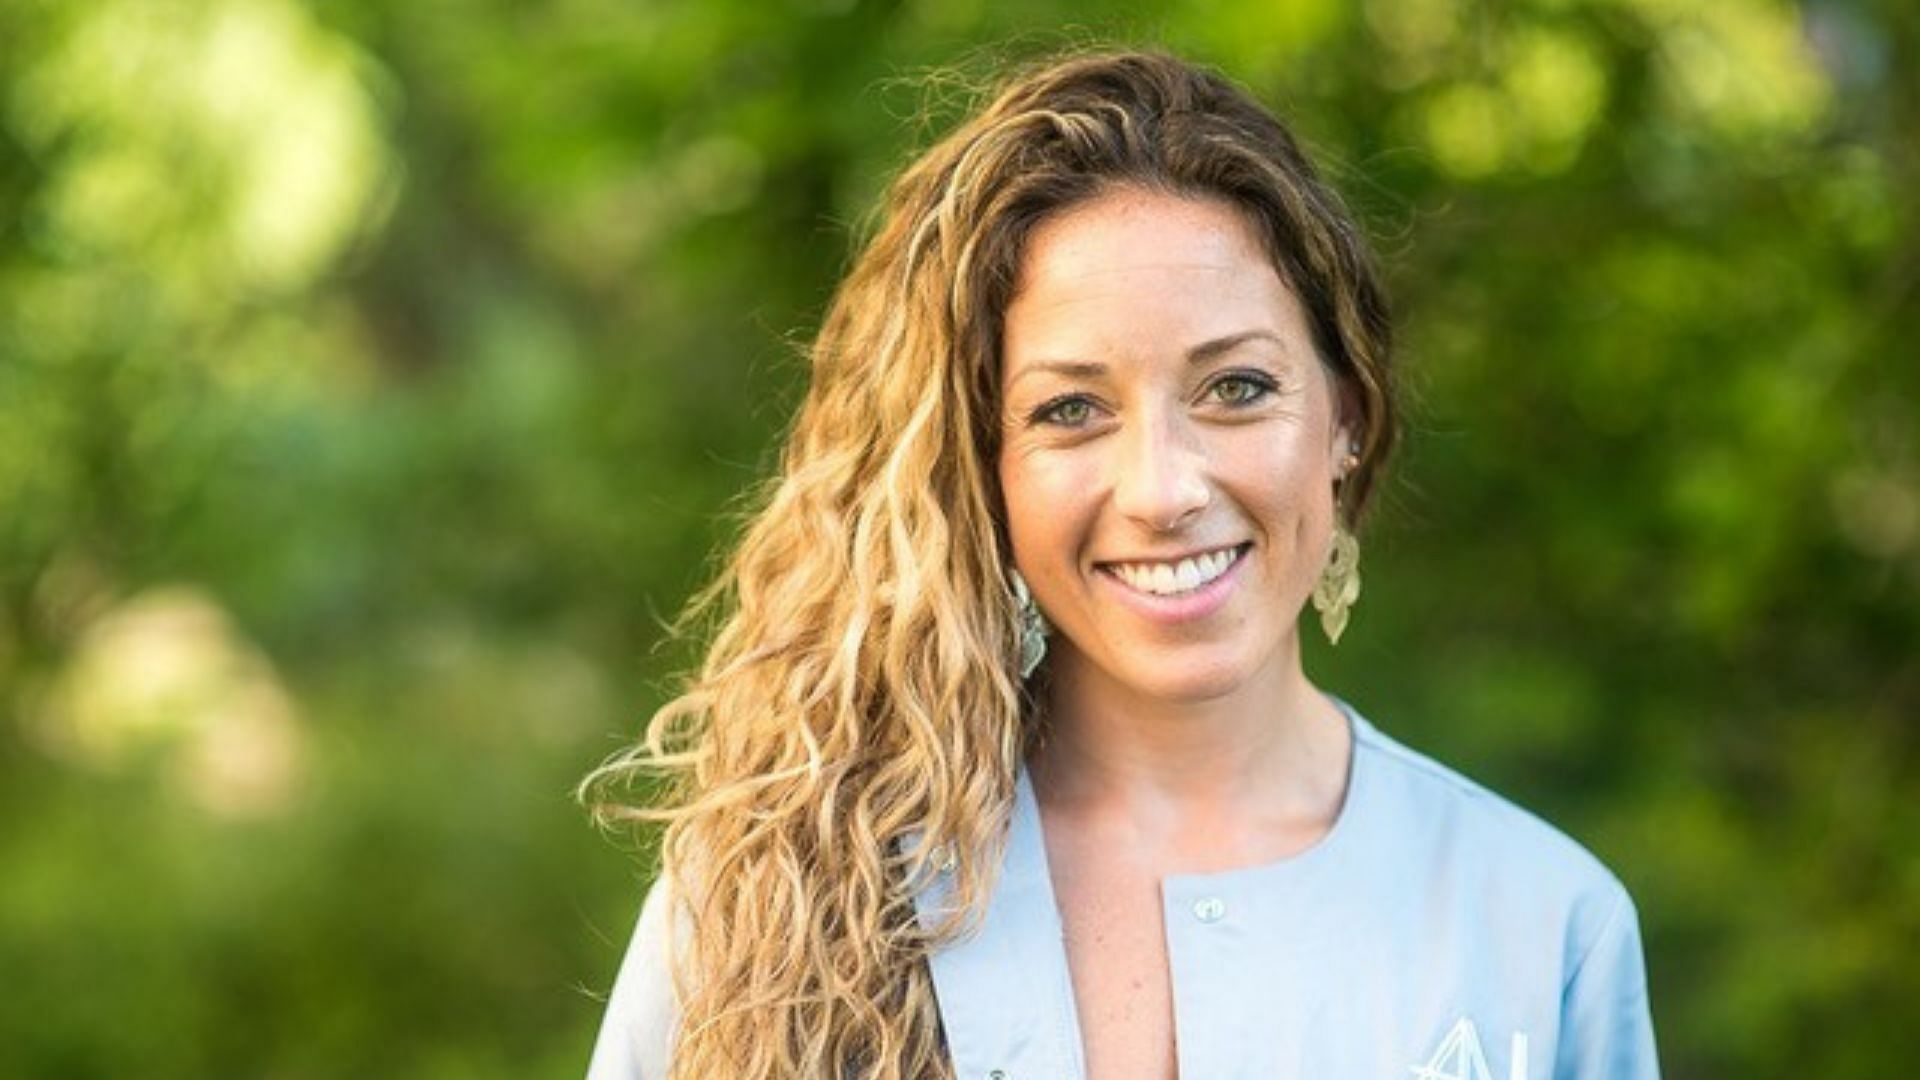 Meet Lindsay Dolashewich from Survivor 42 (Image via absolutenutritioncounseling/Instagram)